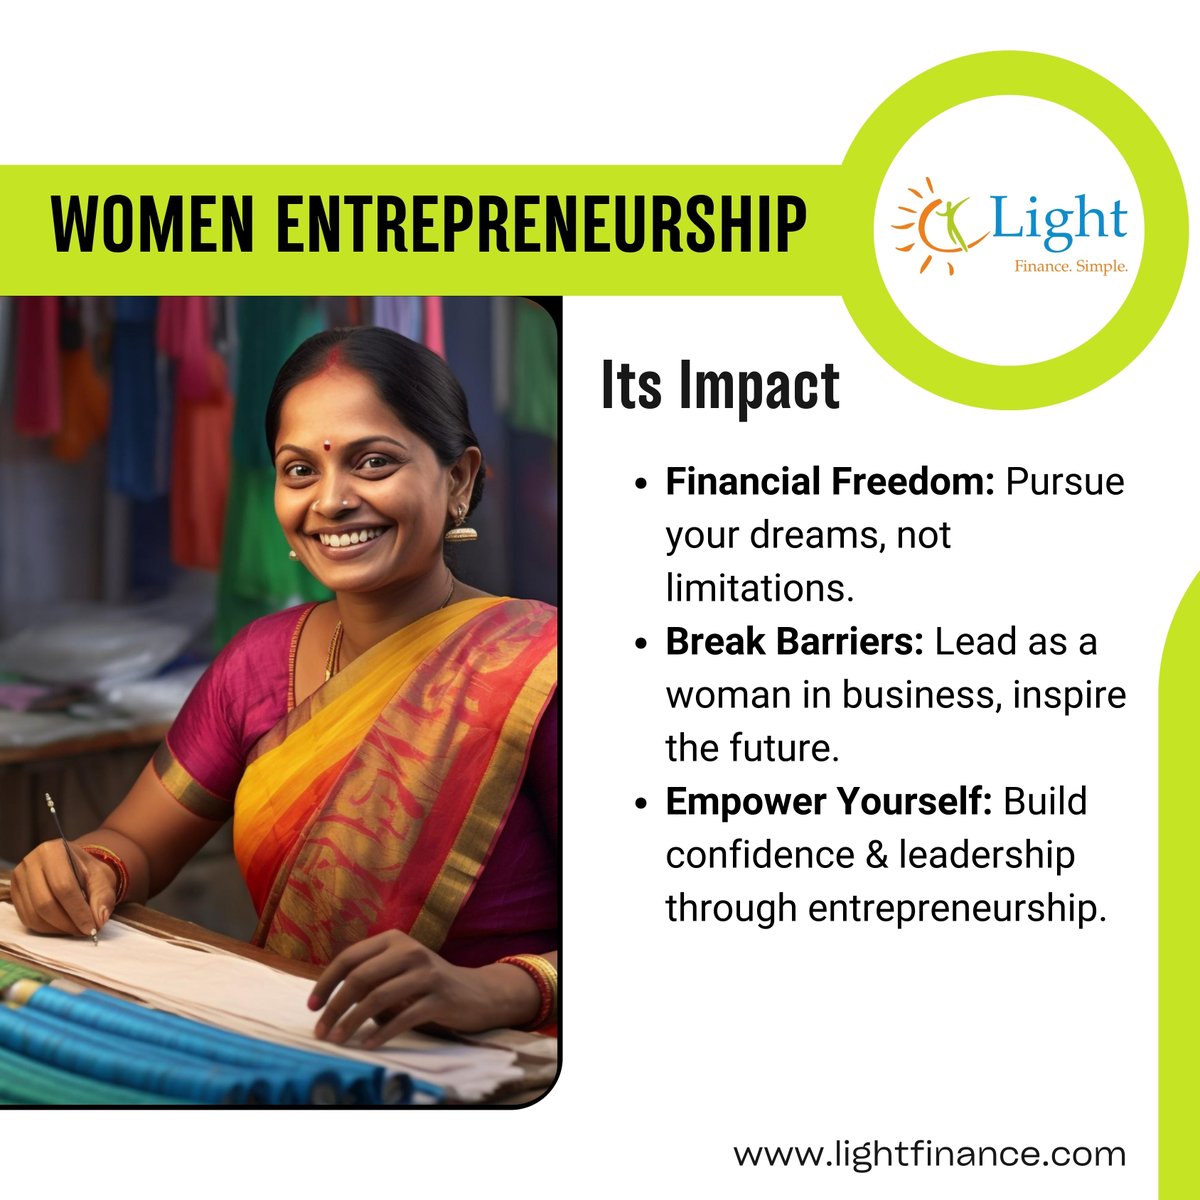 Chase dreams, not limitations. When a woman breaks barriers and leads a business, she empowers not only herself, but also her family and community. #womenetrepreneur #microfinance #smallbusinesstips #wearelight #ruralentrepreneurship